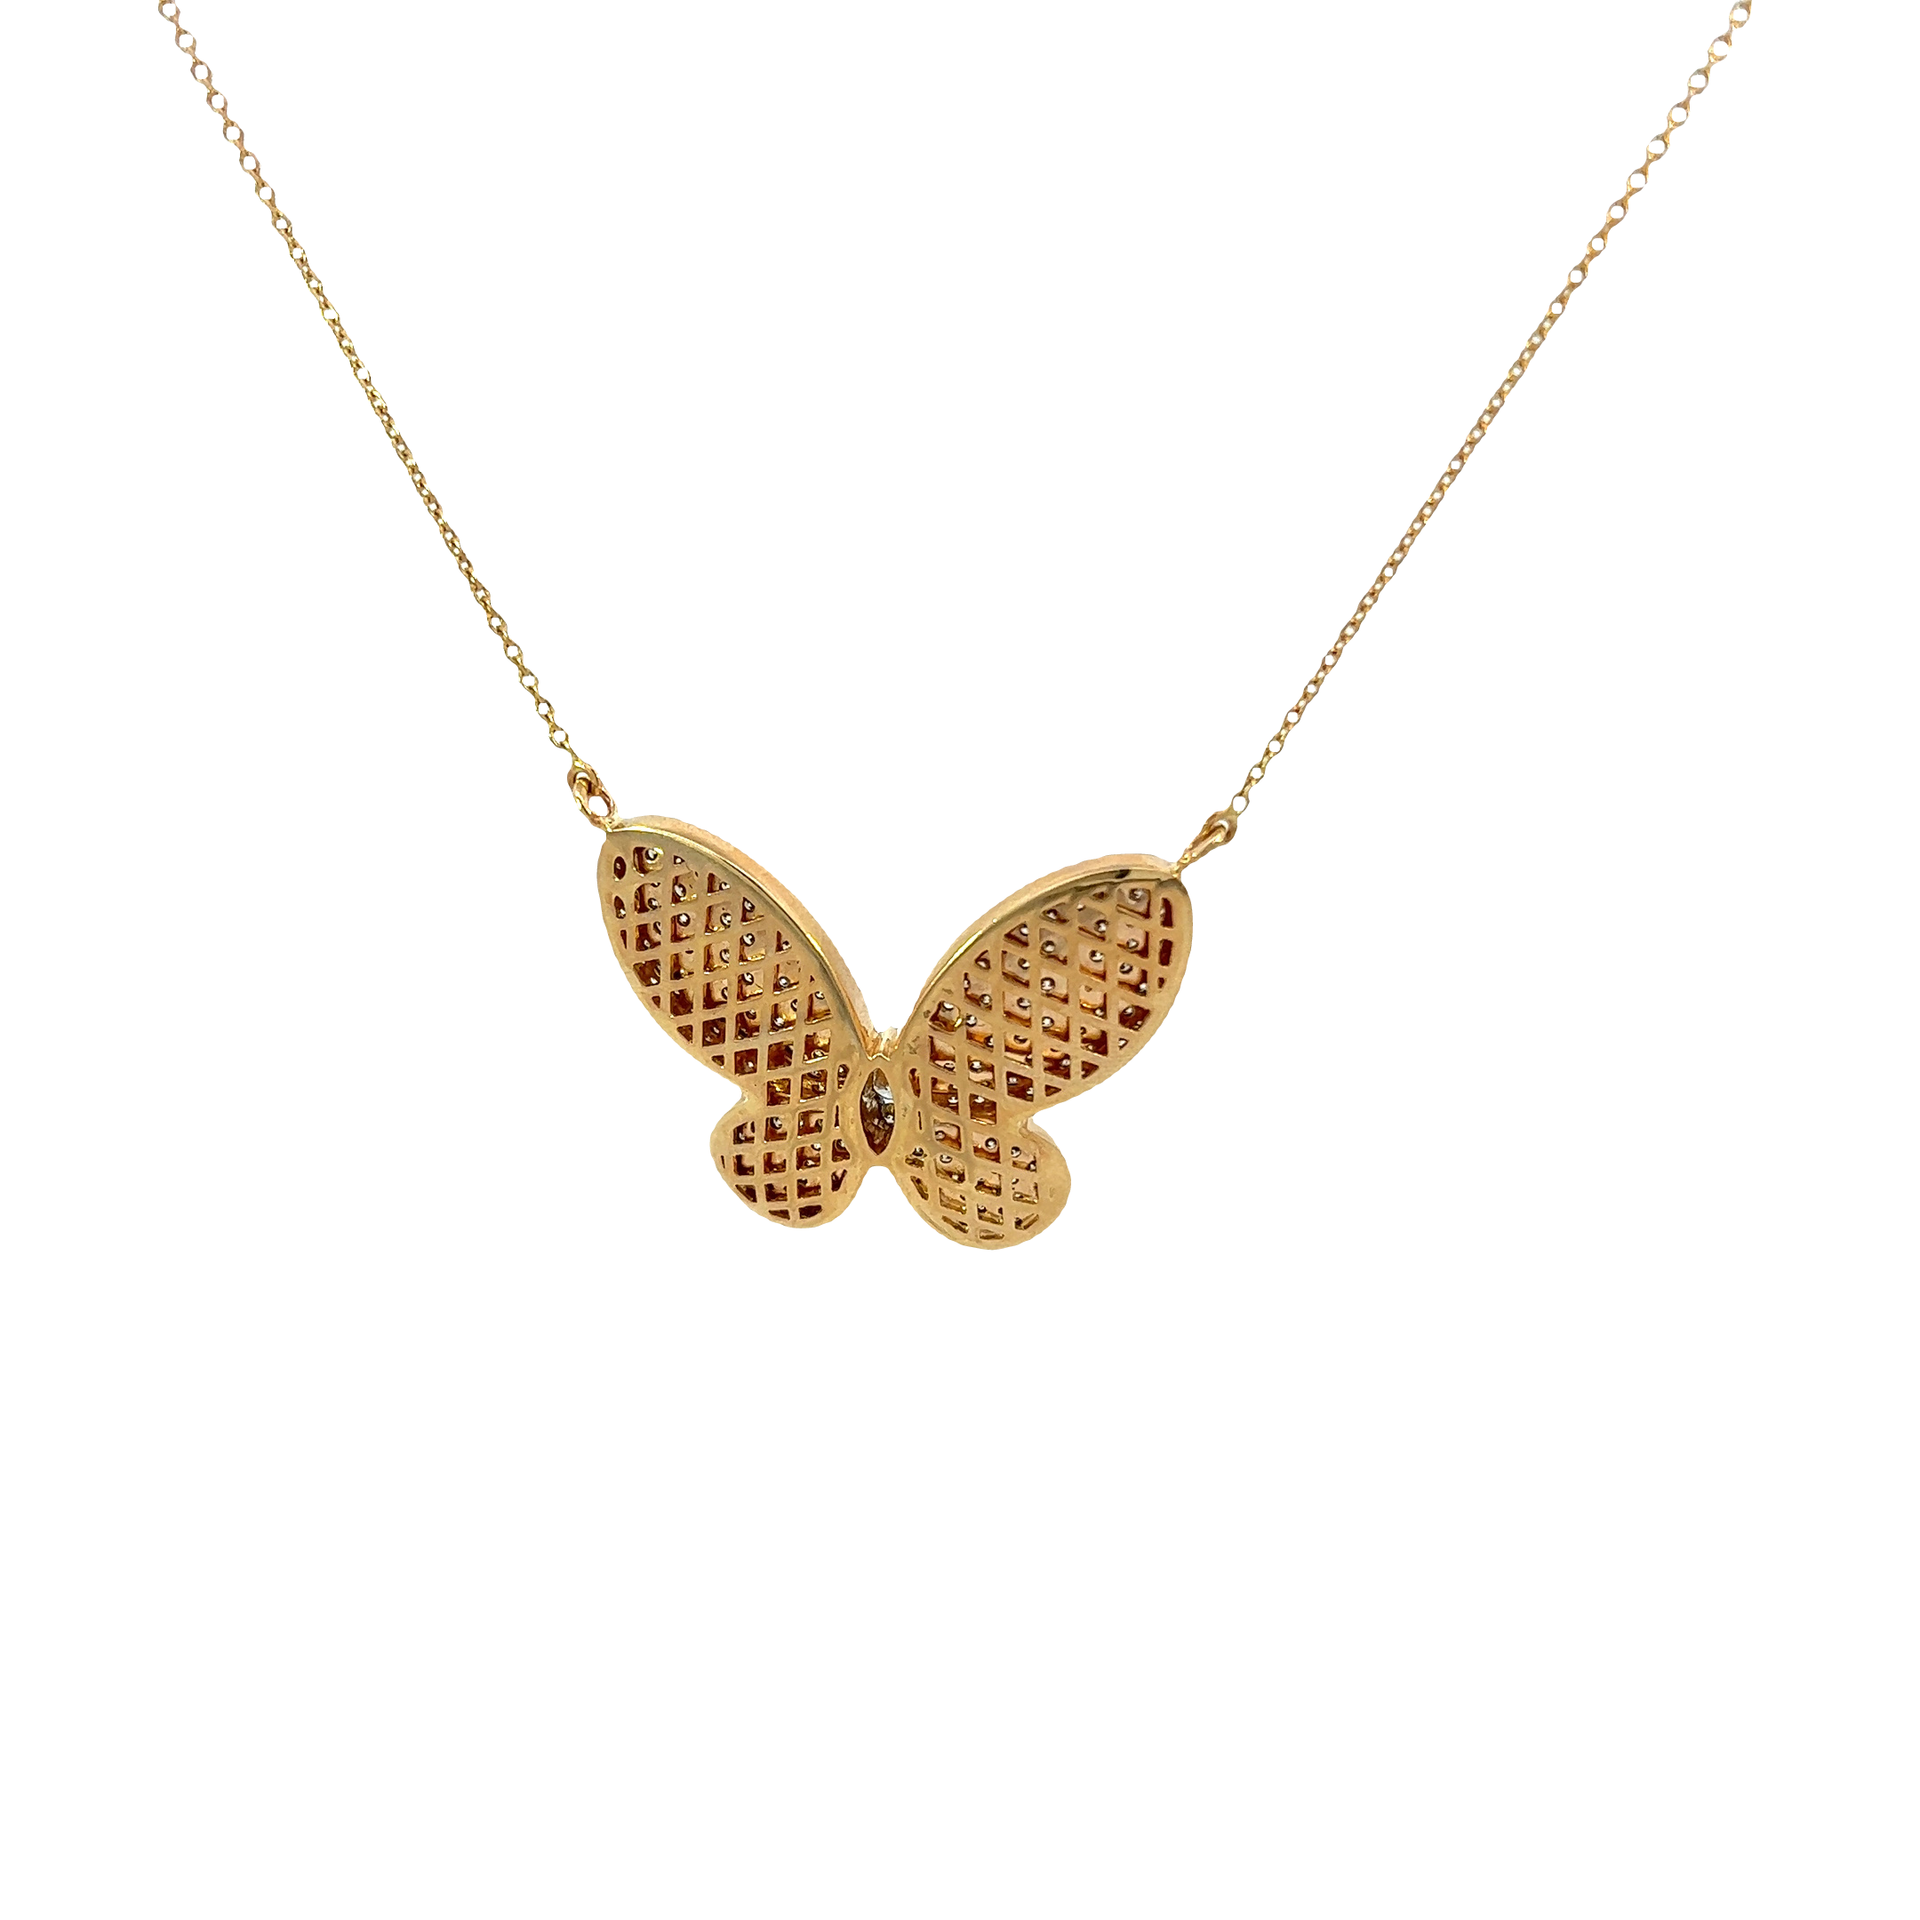 BUTTERFLY PENDANT NECKLACE.